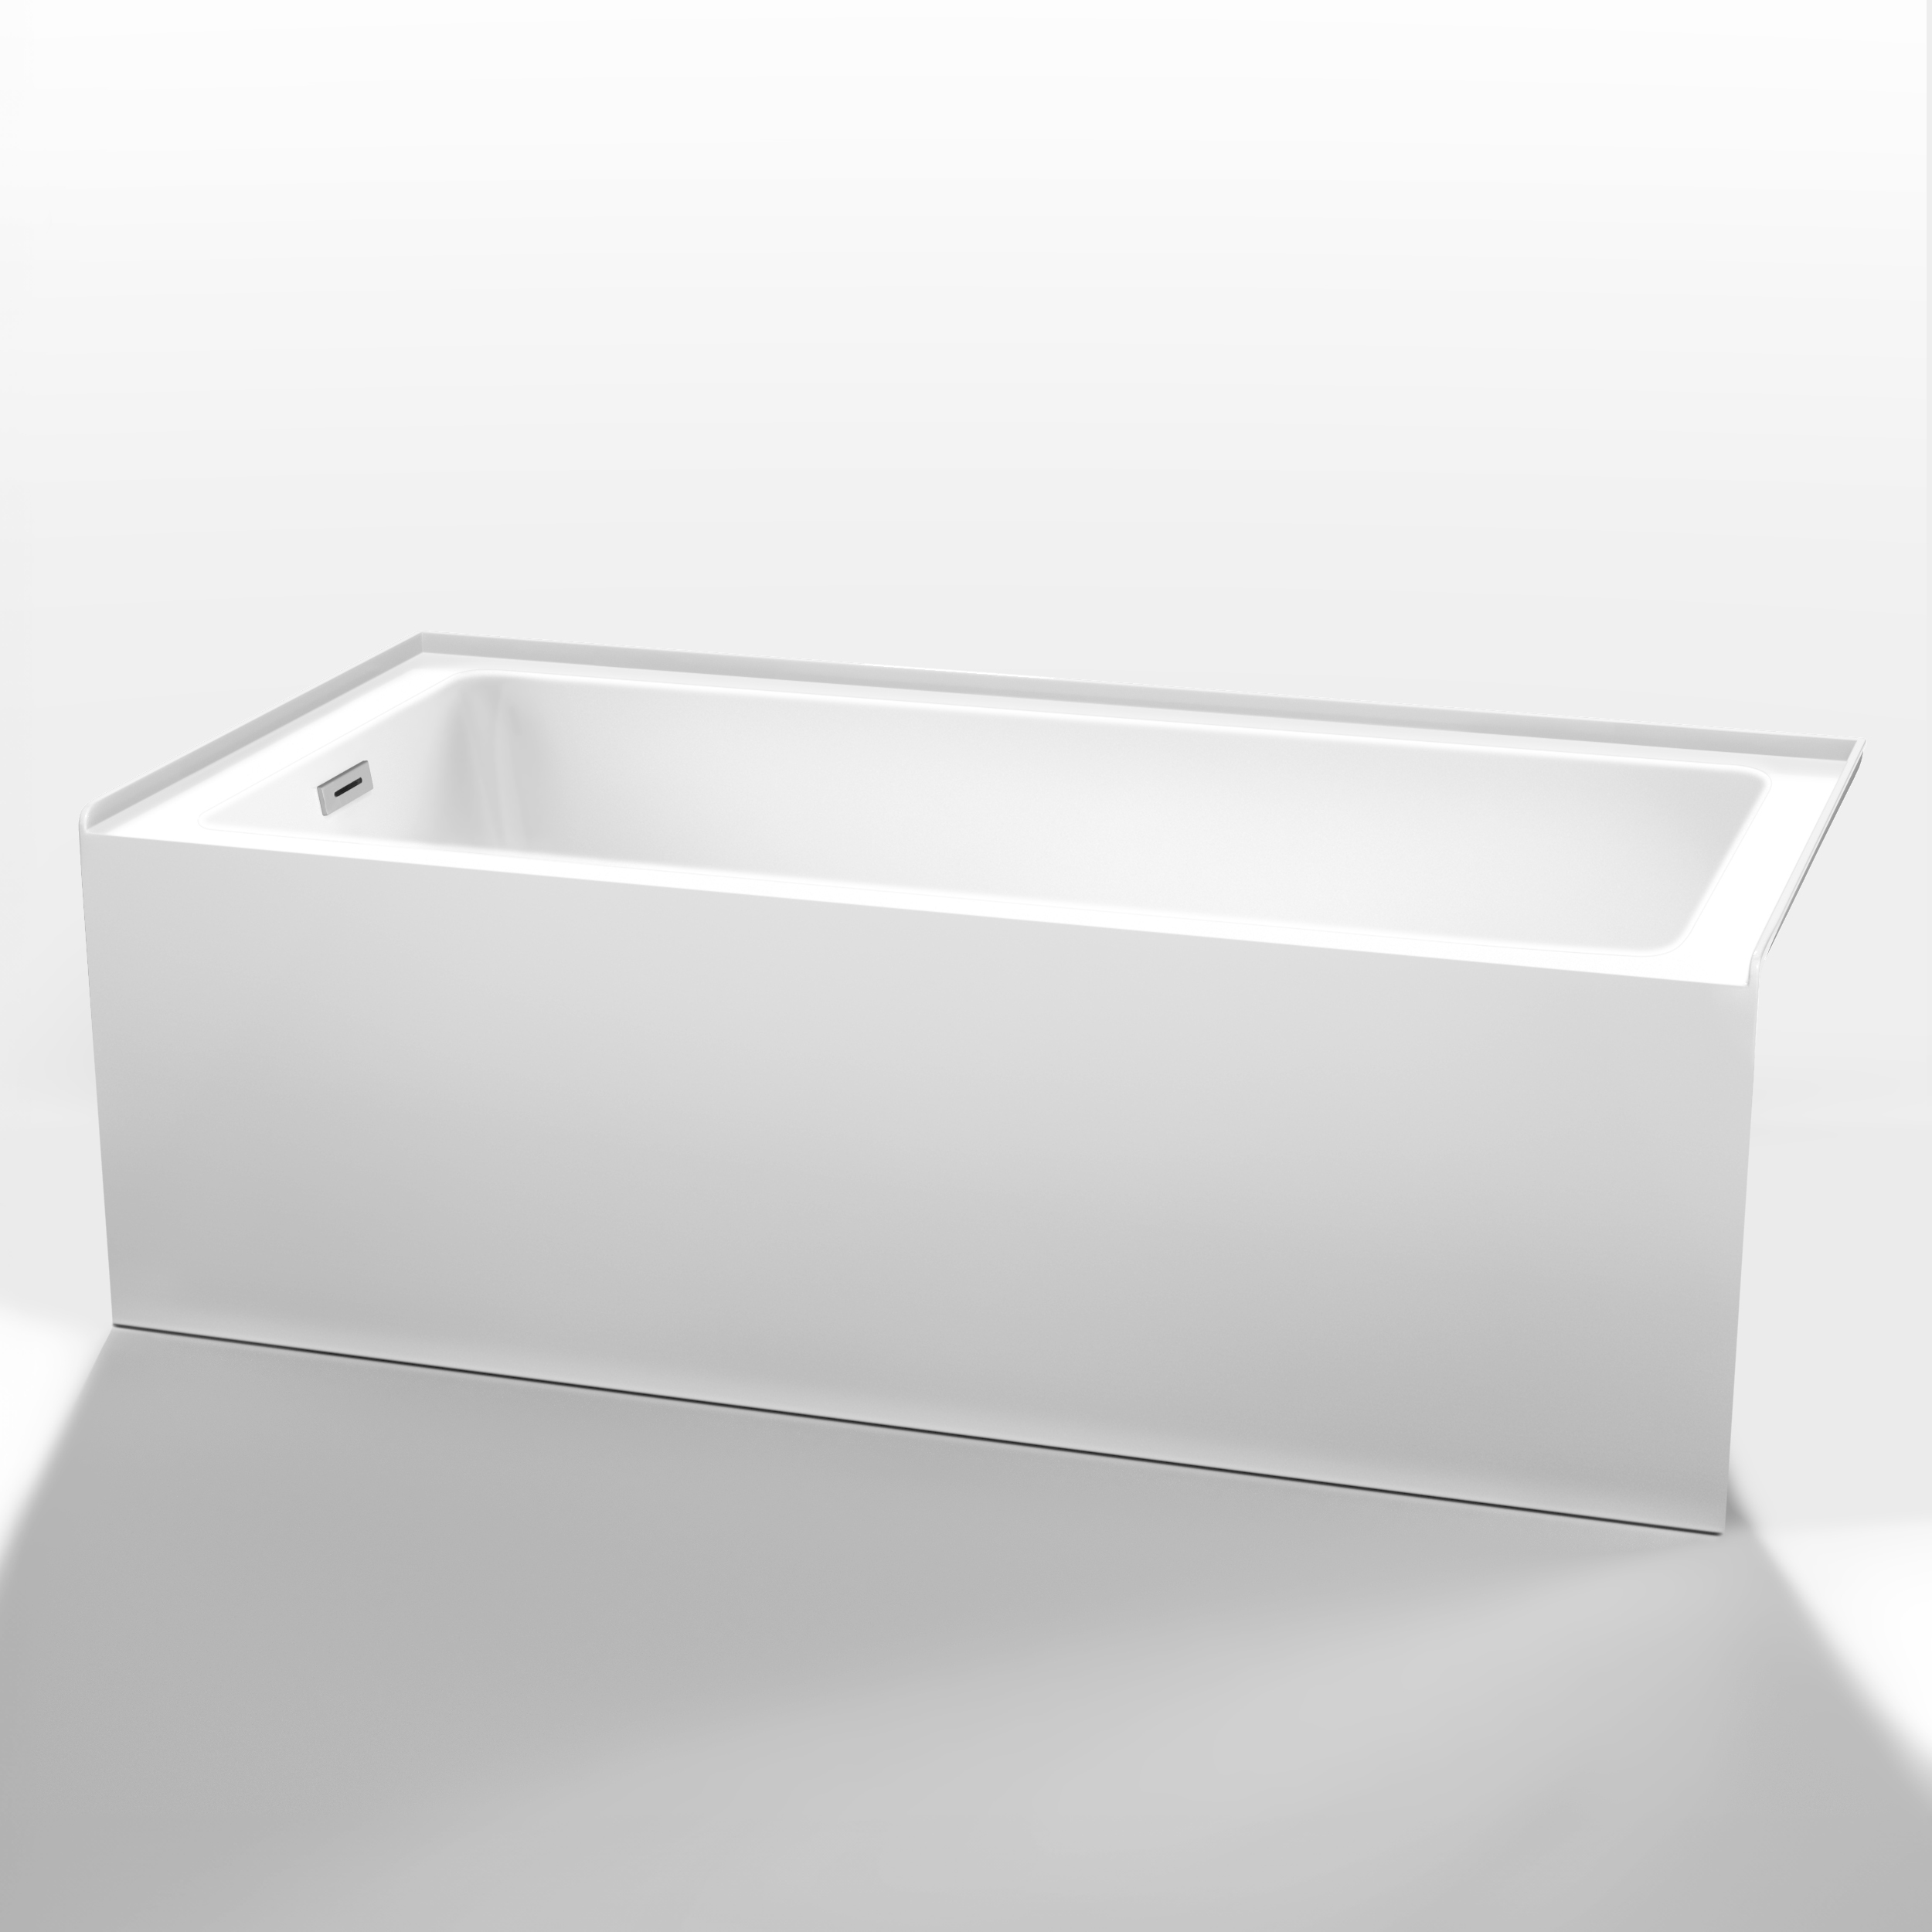 Grayley Alcove 66" Bathtub, Left Side Drain by Wyndham Collection - White WC-BTE-6632L